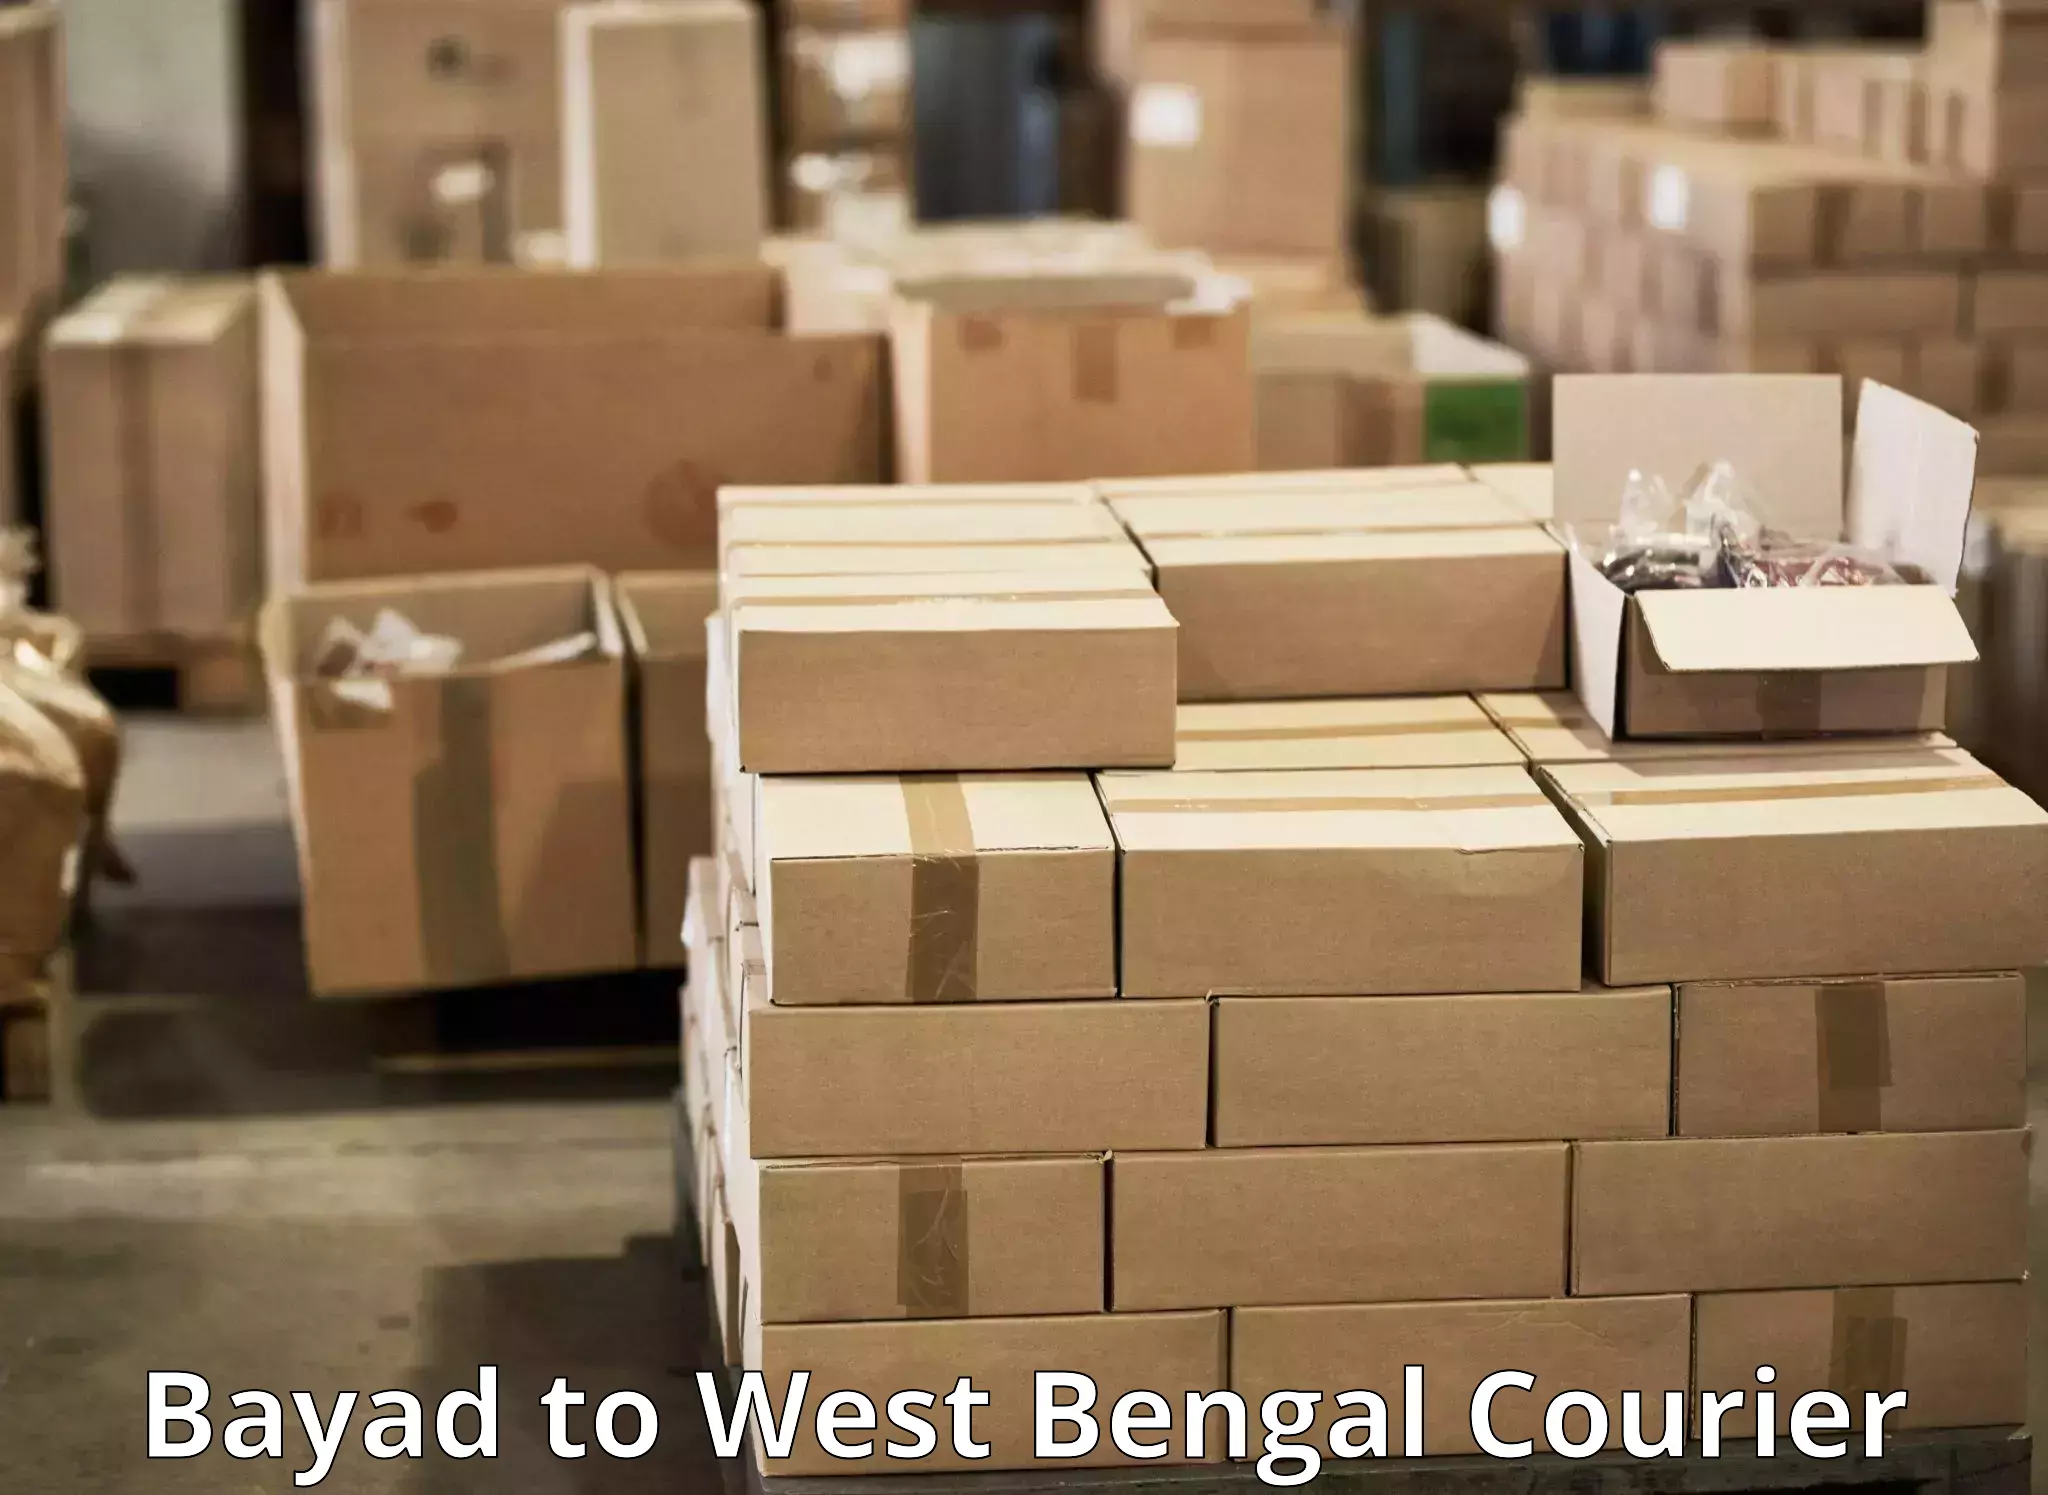 Multi-city courier Bayad to West Bengal